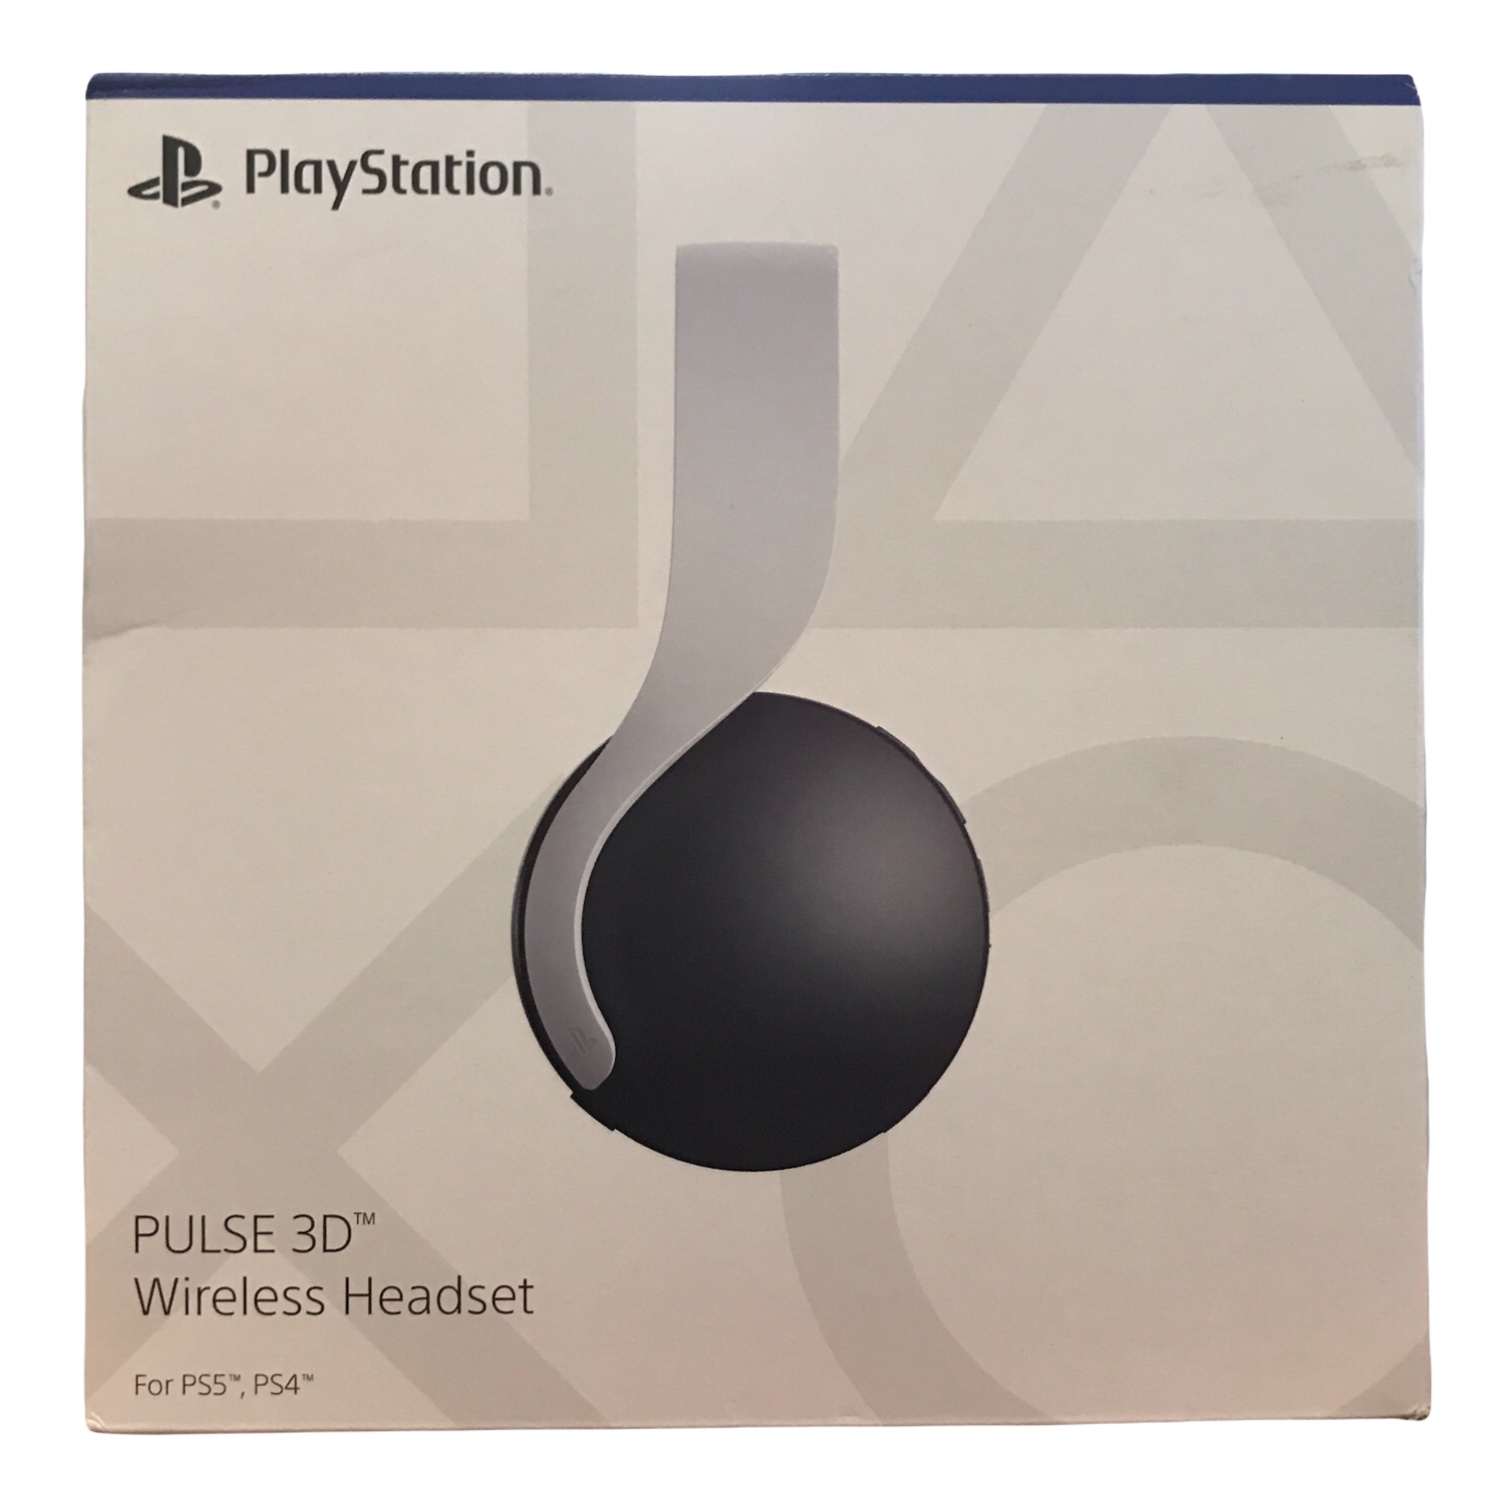 Sony PULSE 3D Wireless Headset for PlayStation 5, White - image 1 of 4